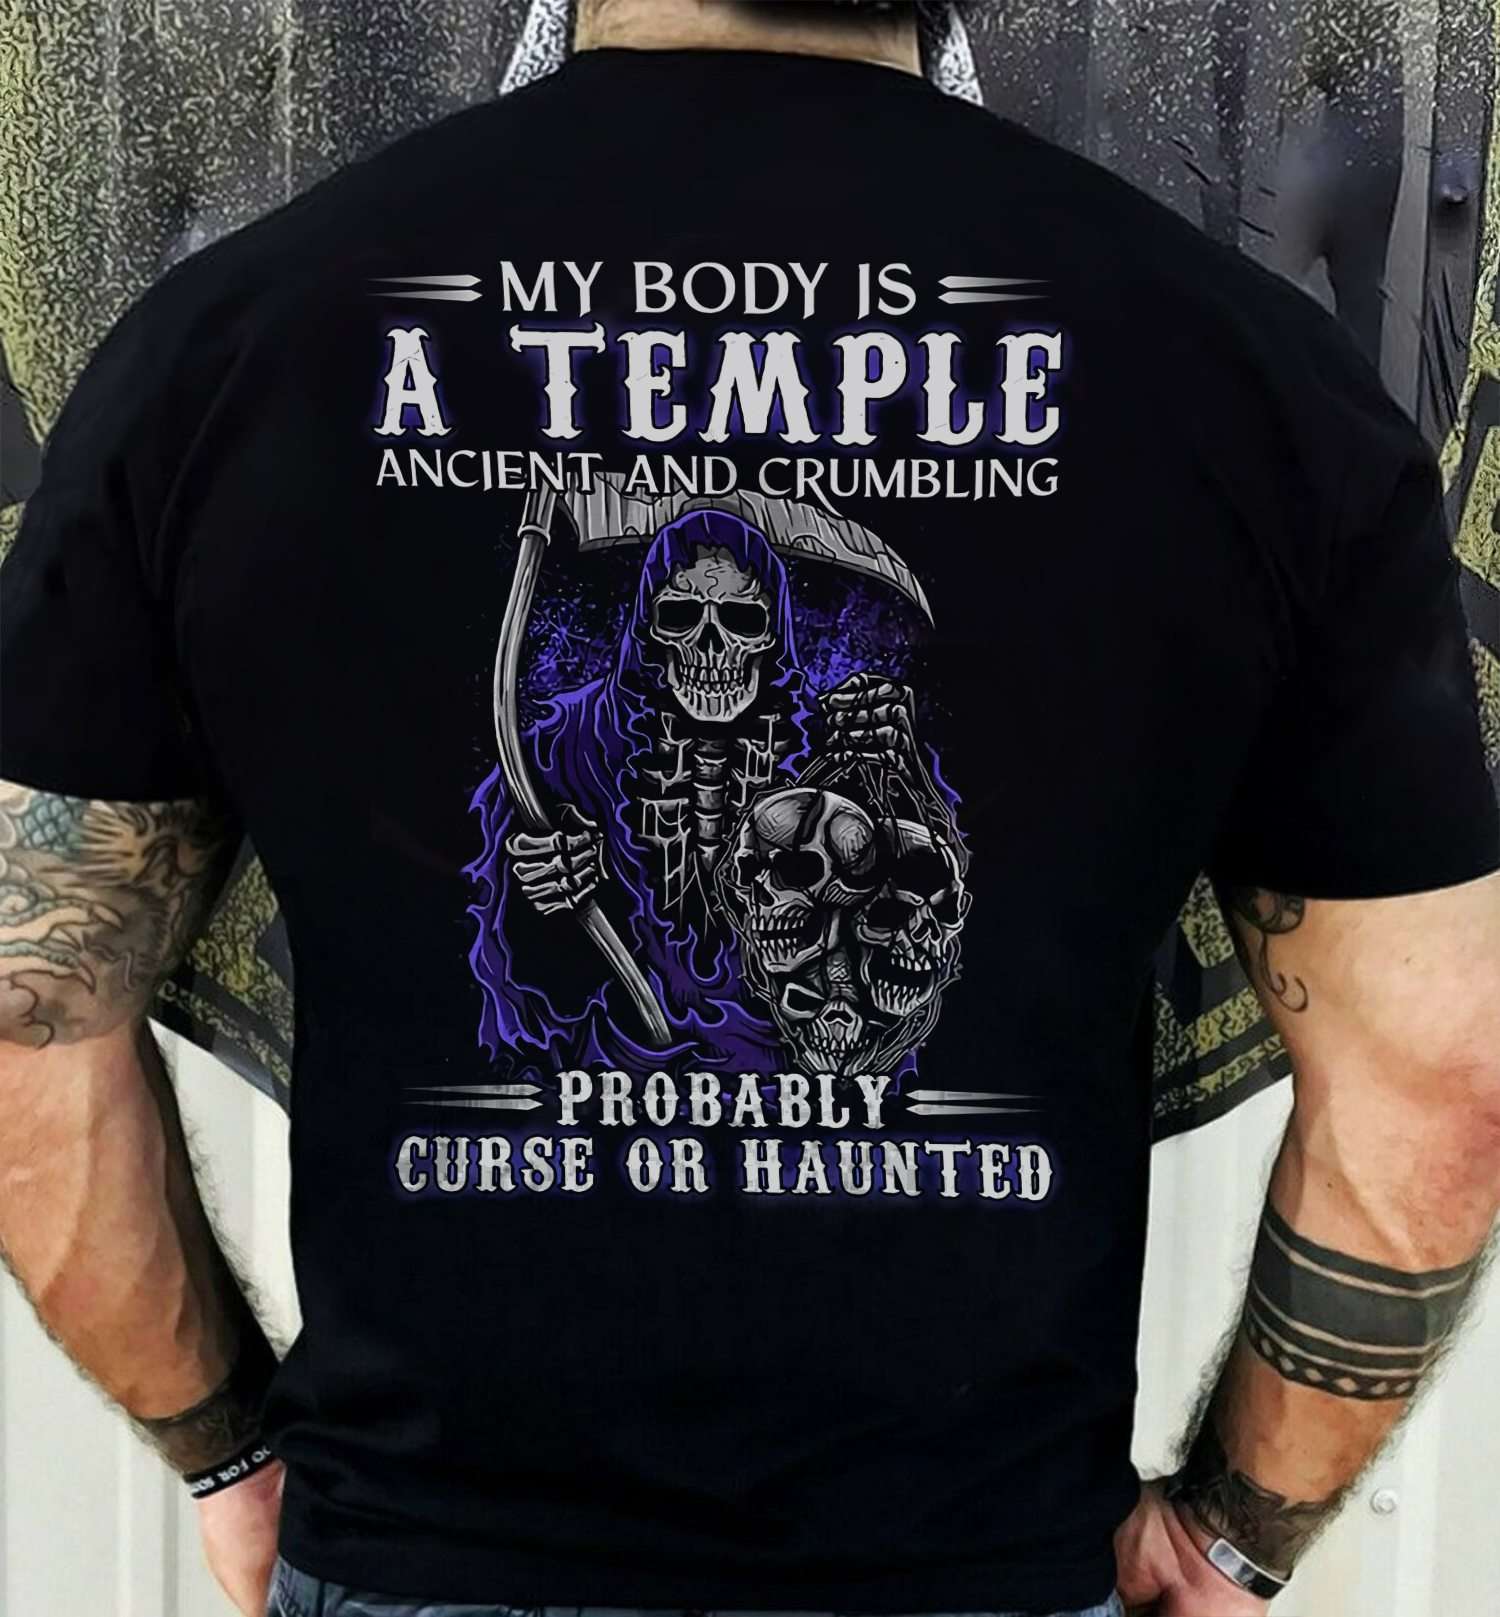 My body is a temple - Ancient and crumbling probably curse or haunted, Head hunter evil